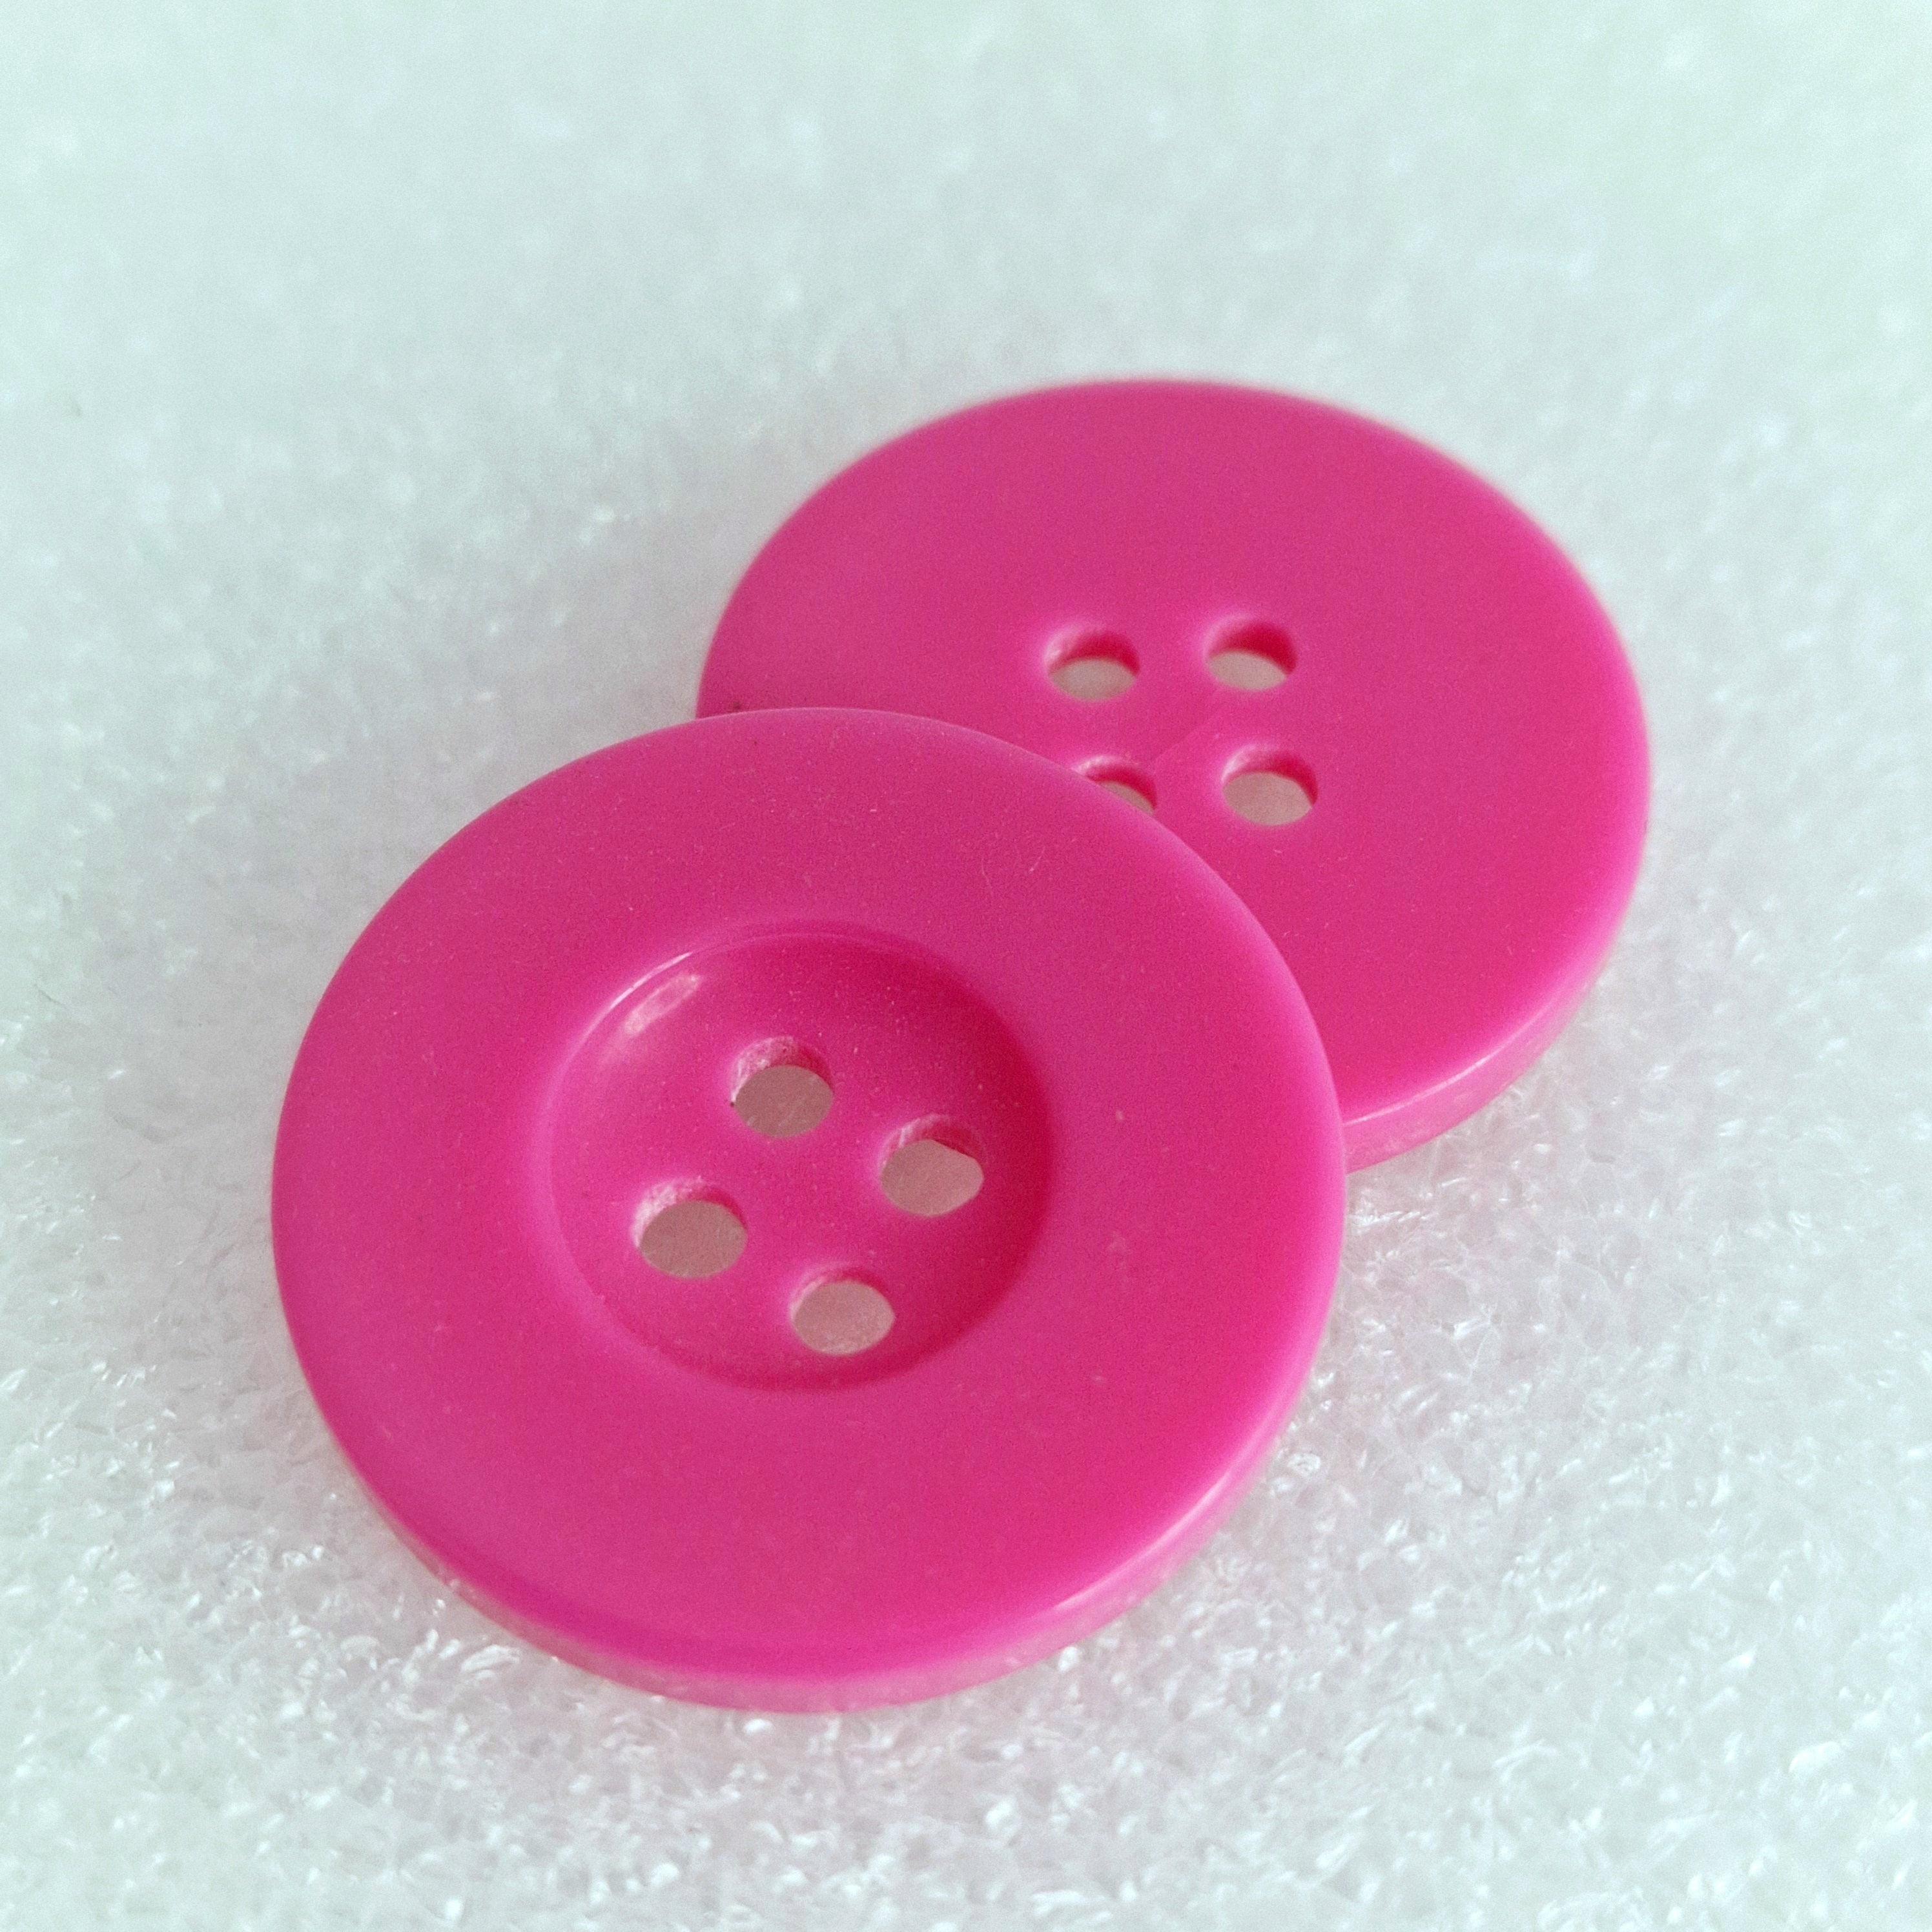 MajorCrafts 16pcs 25mm Hot Pink 4 Holes Round Resin Sewing Buttons